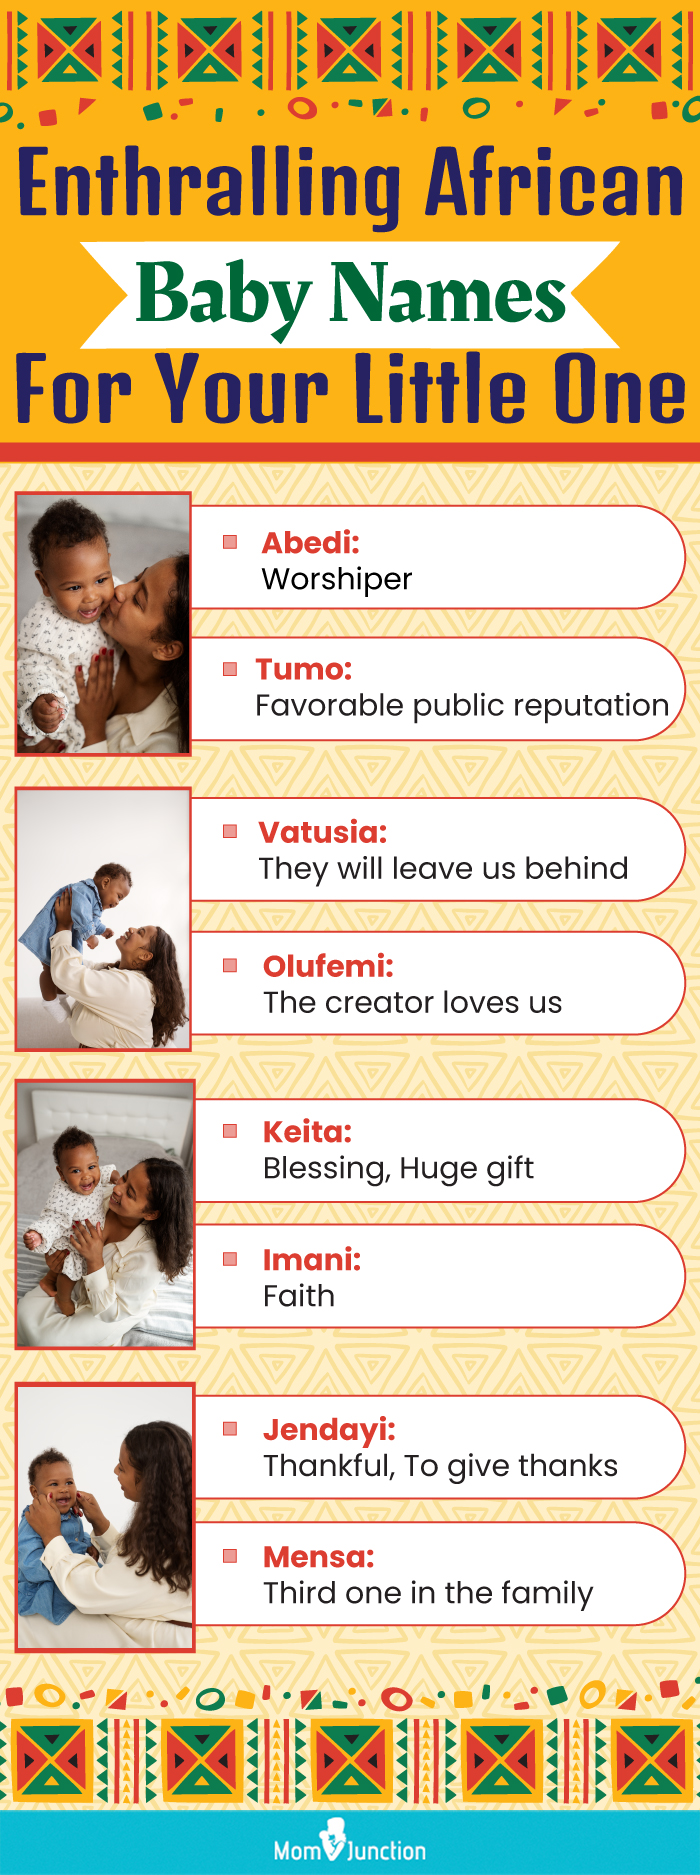 enthralling african baby names for your little one (infographic)